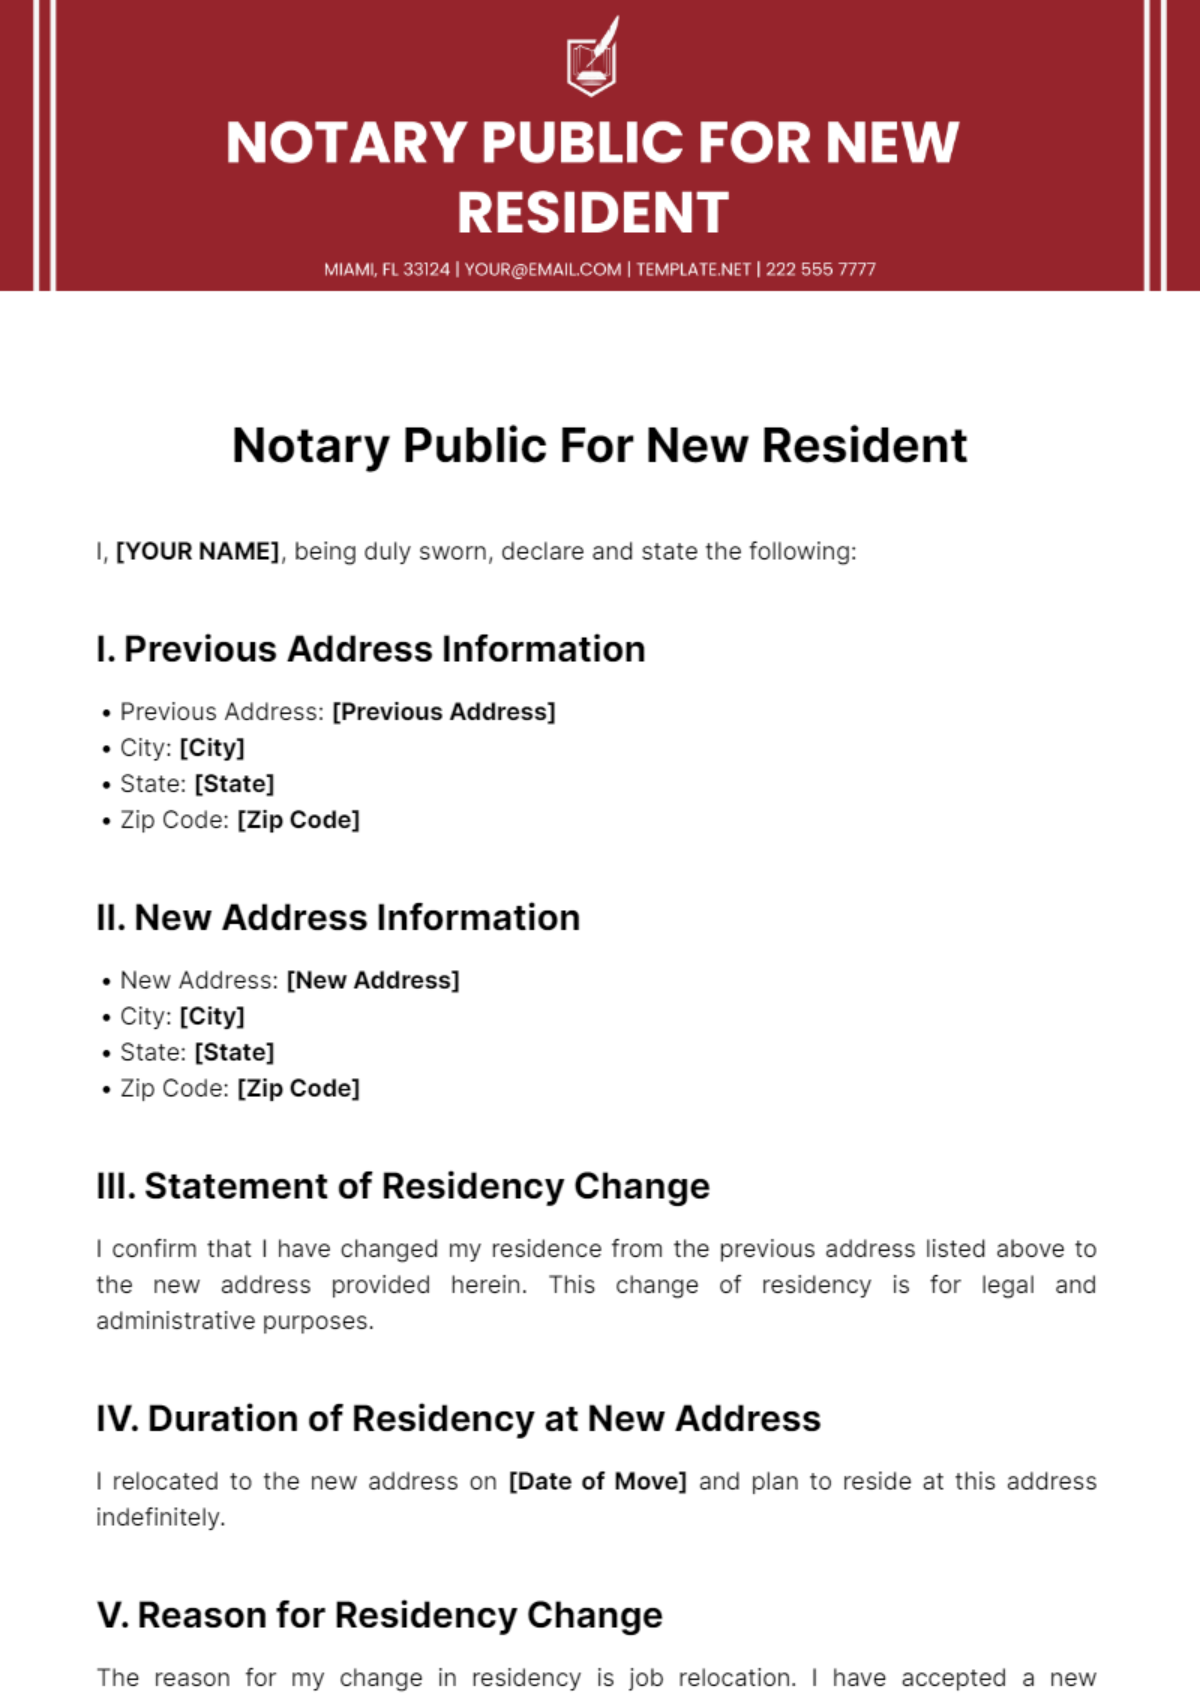 Notary Public For New Resident Template